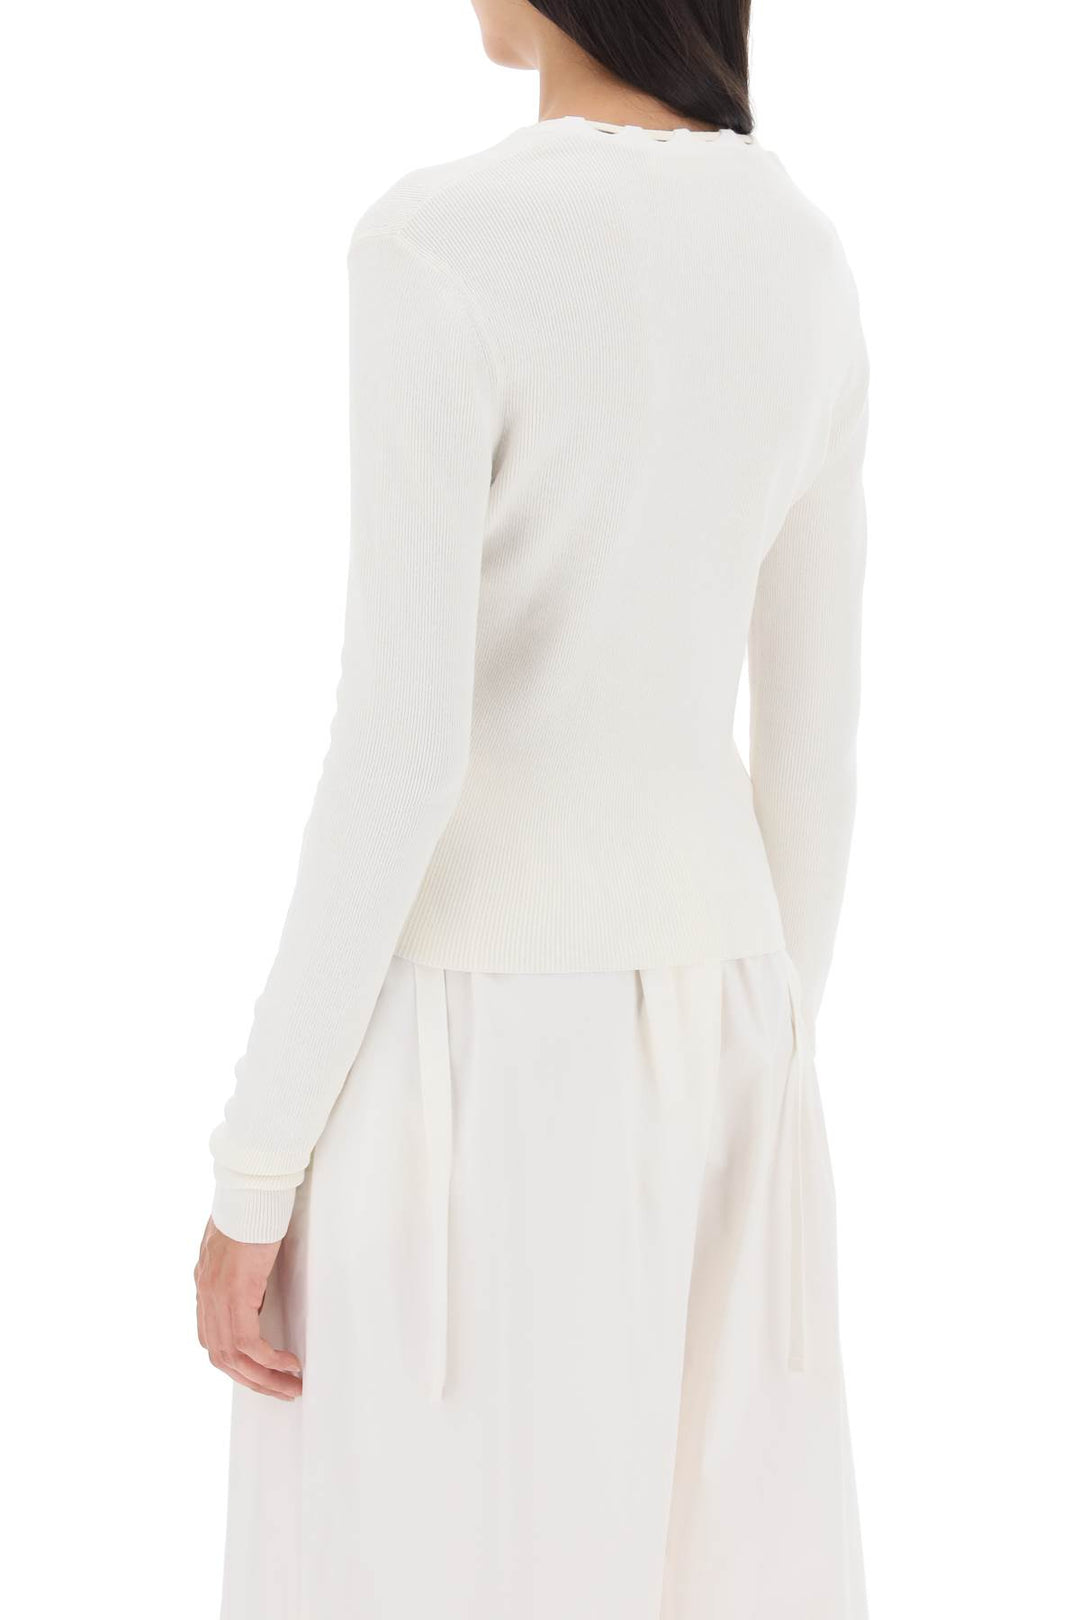 Dion lee lace-up cardigan-2